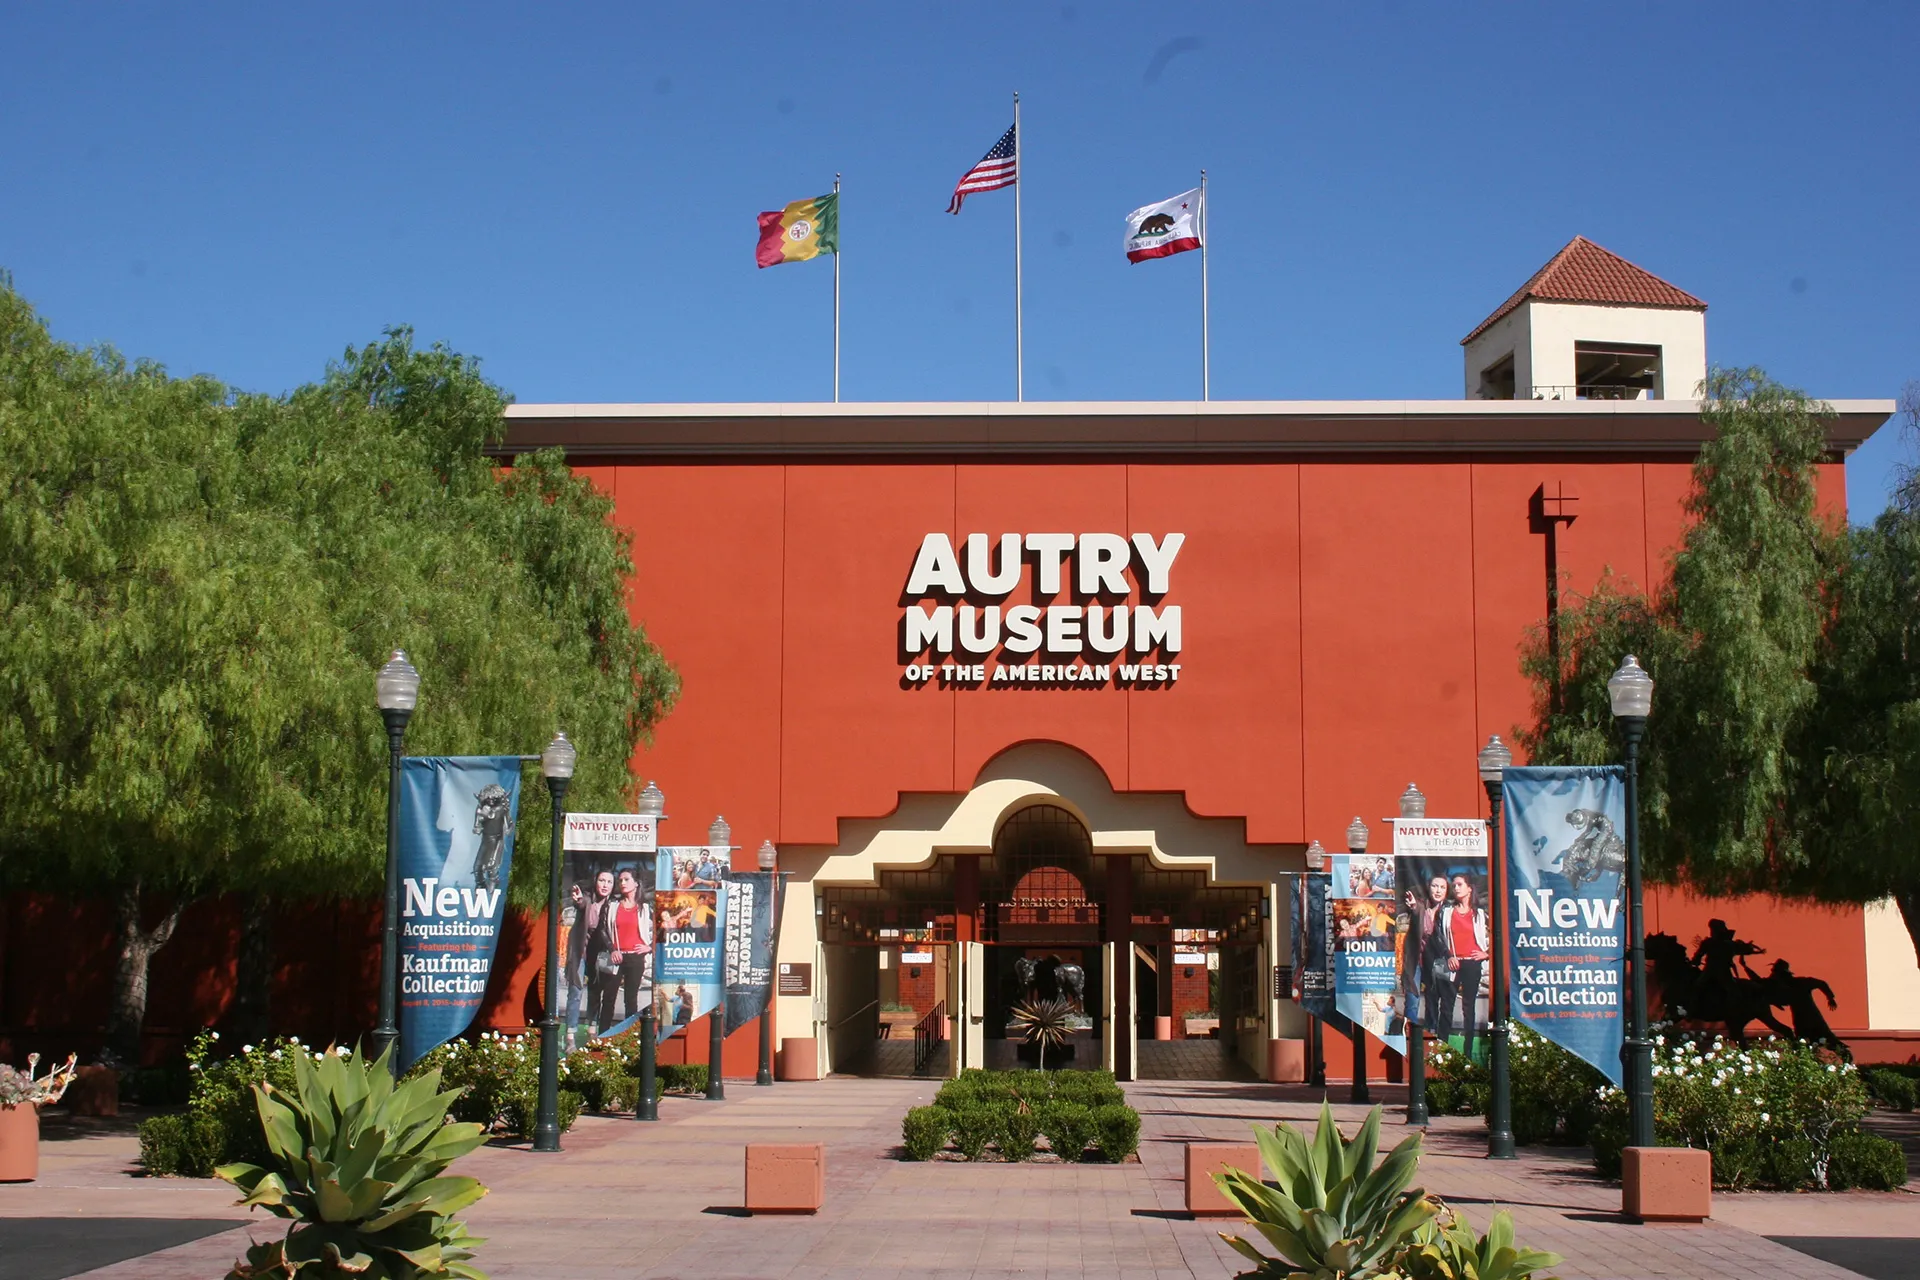 Entrance to the Autry Museum of the American West